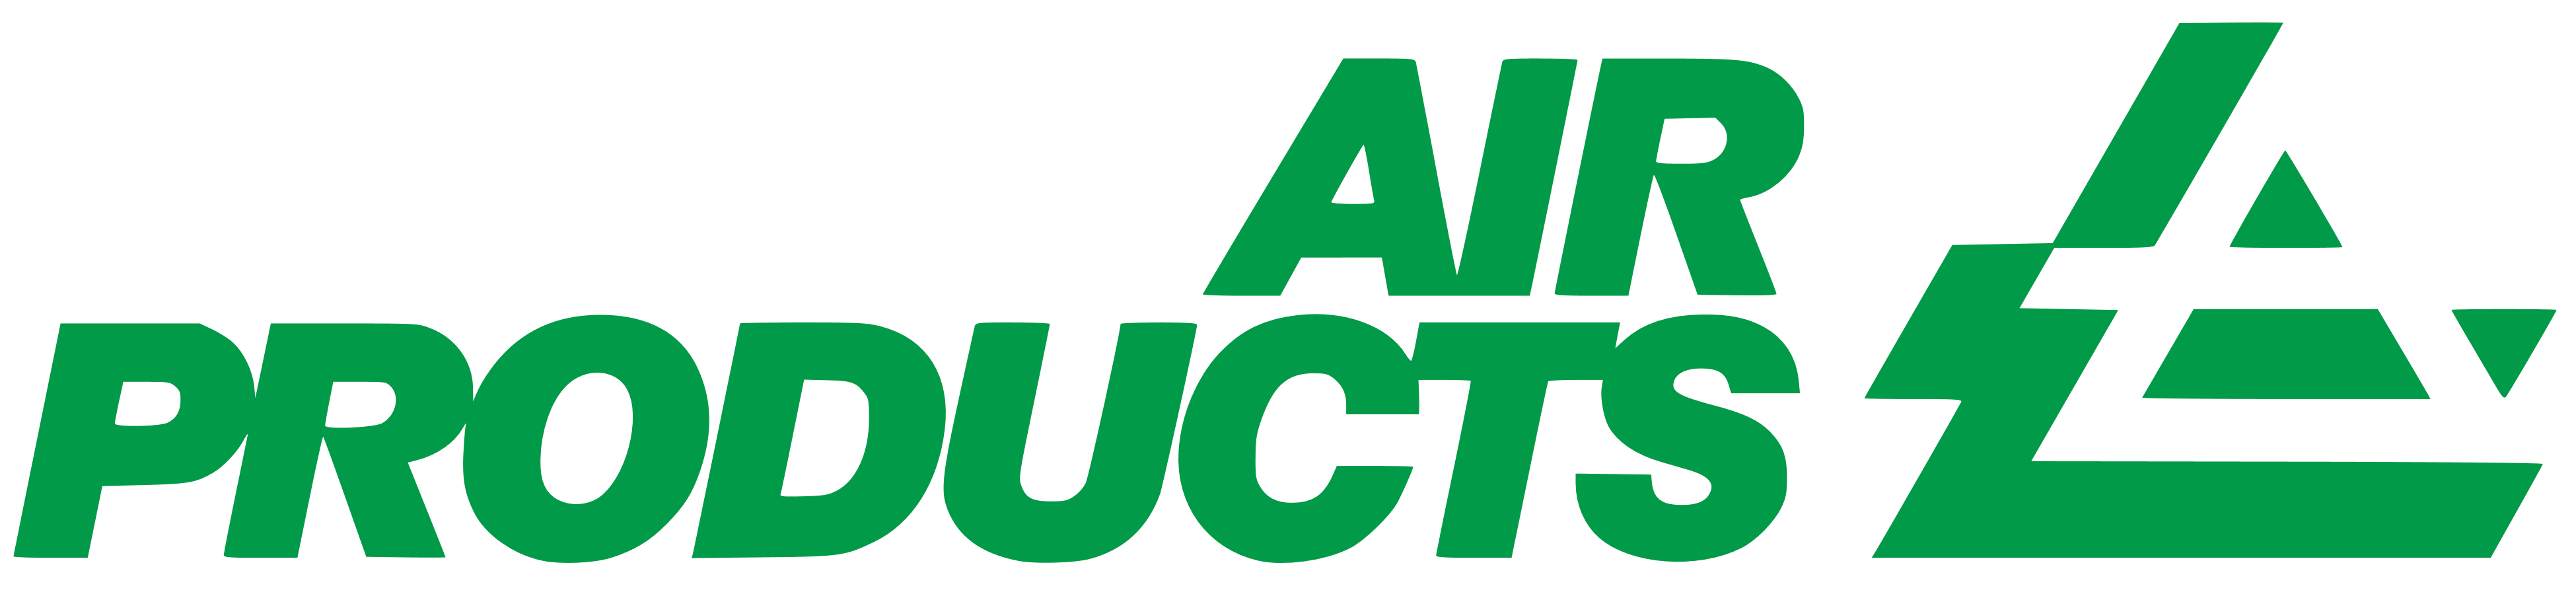 airproducts logo